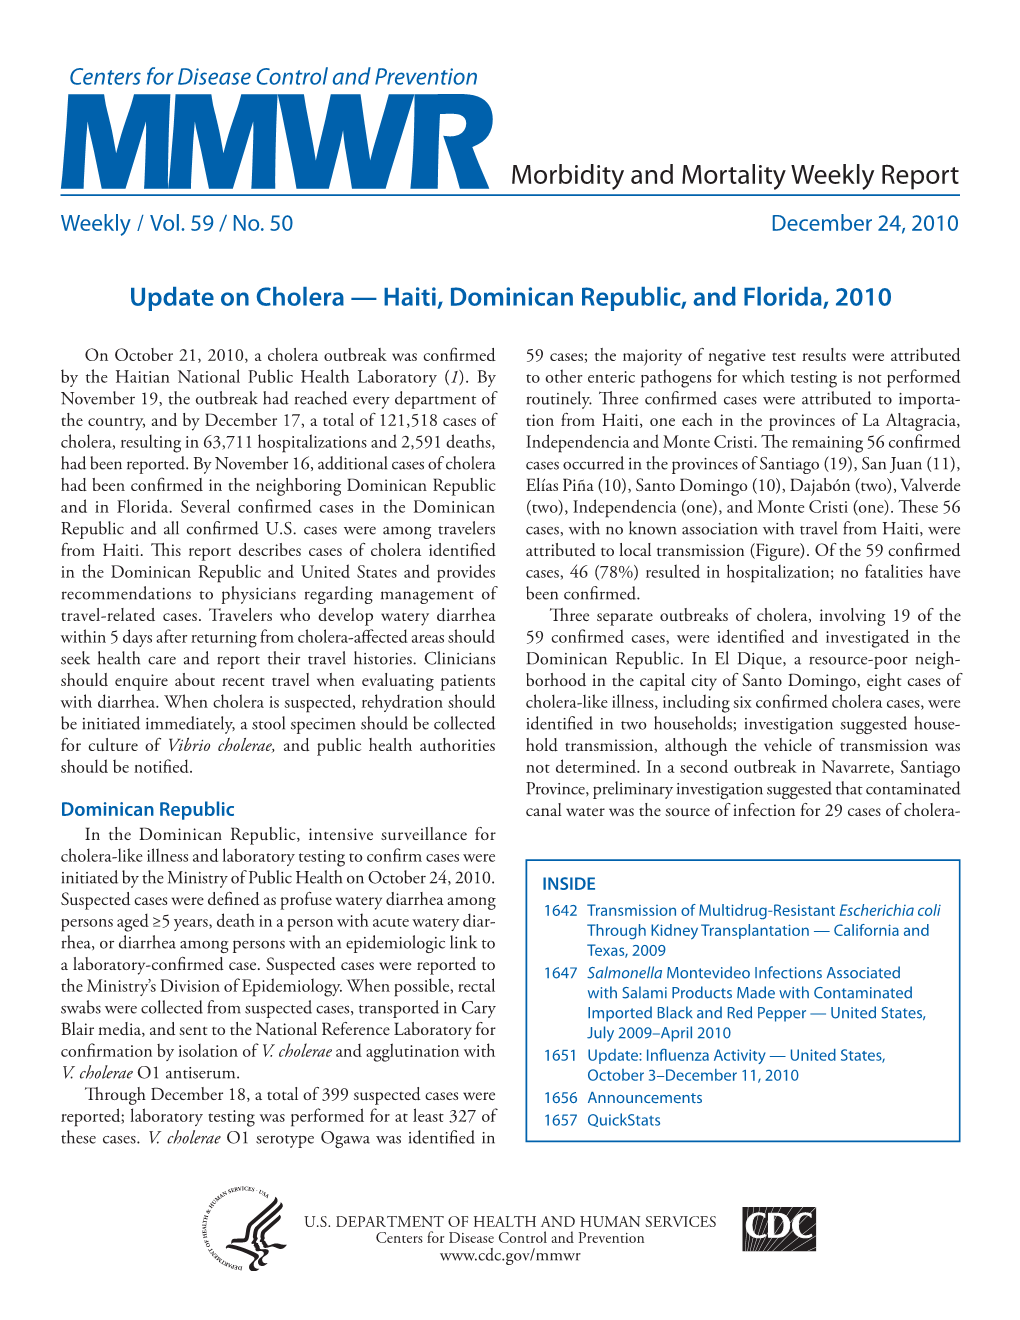 Morbidity and Mortality Weekly Report Update on Cholera